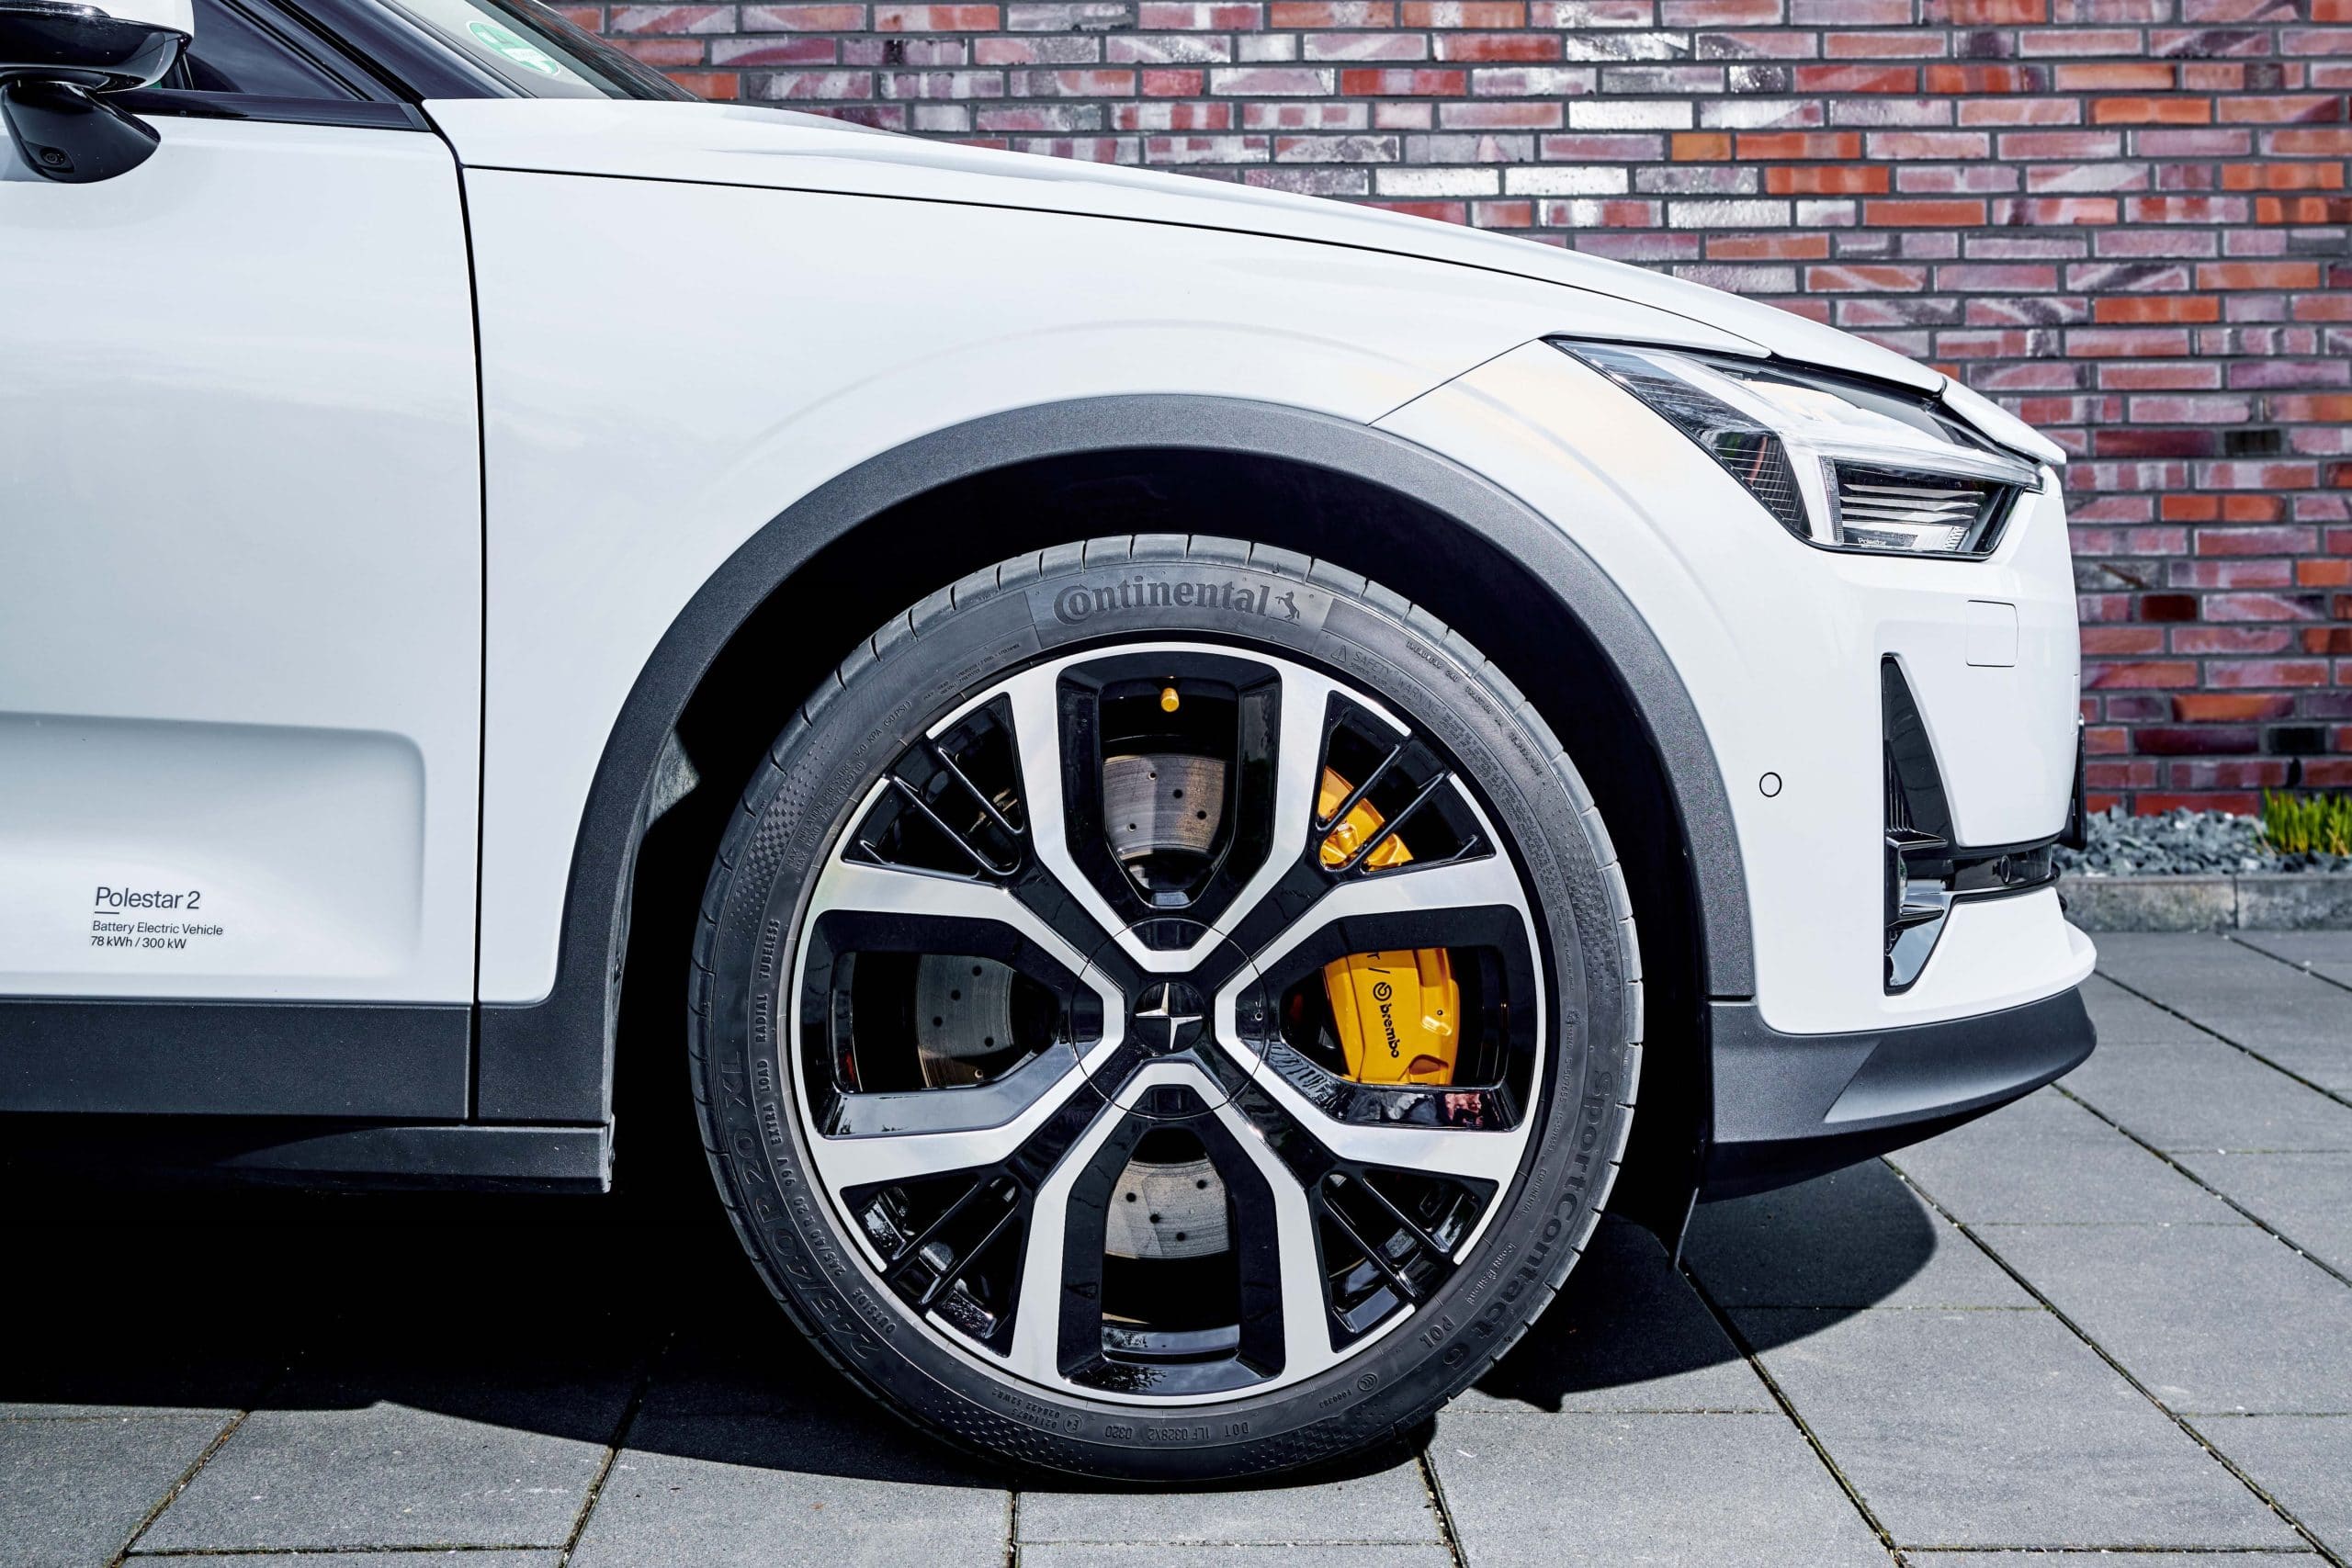 Six of the world's ten most successful electric vehicle manufacturers are fitted with Continental tires ex works